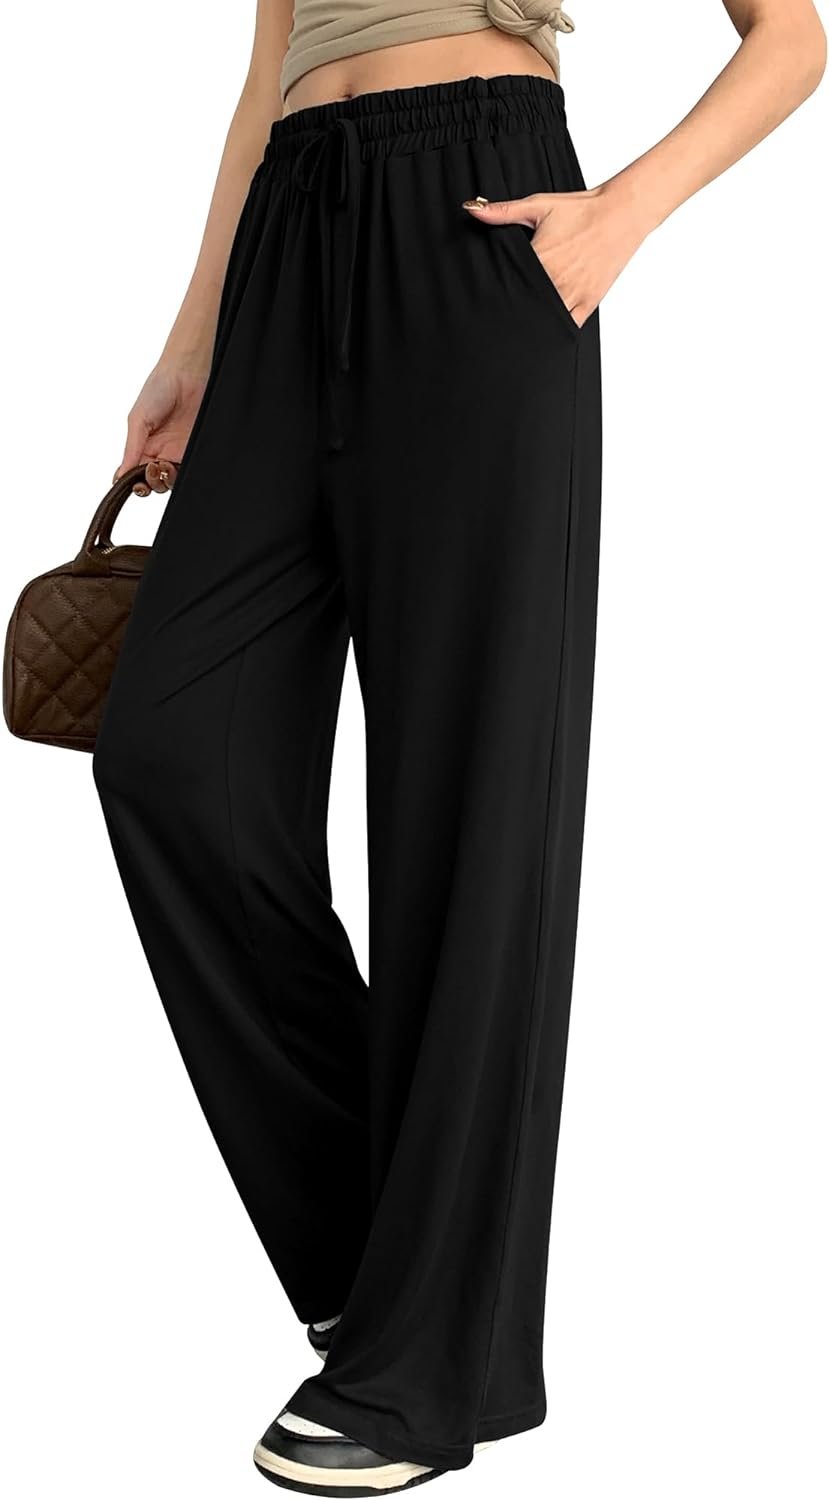 OLIKEME Womens Wide Leg Pants Loose Sweatpants High Waist Stretchy Comfy Athletic Casual Lounge Pants with Pockets